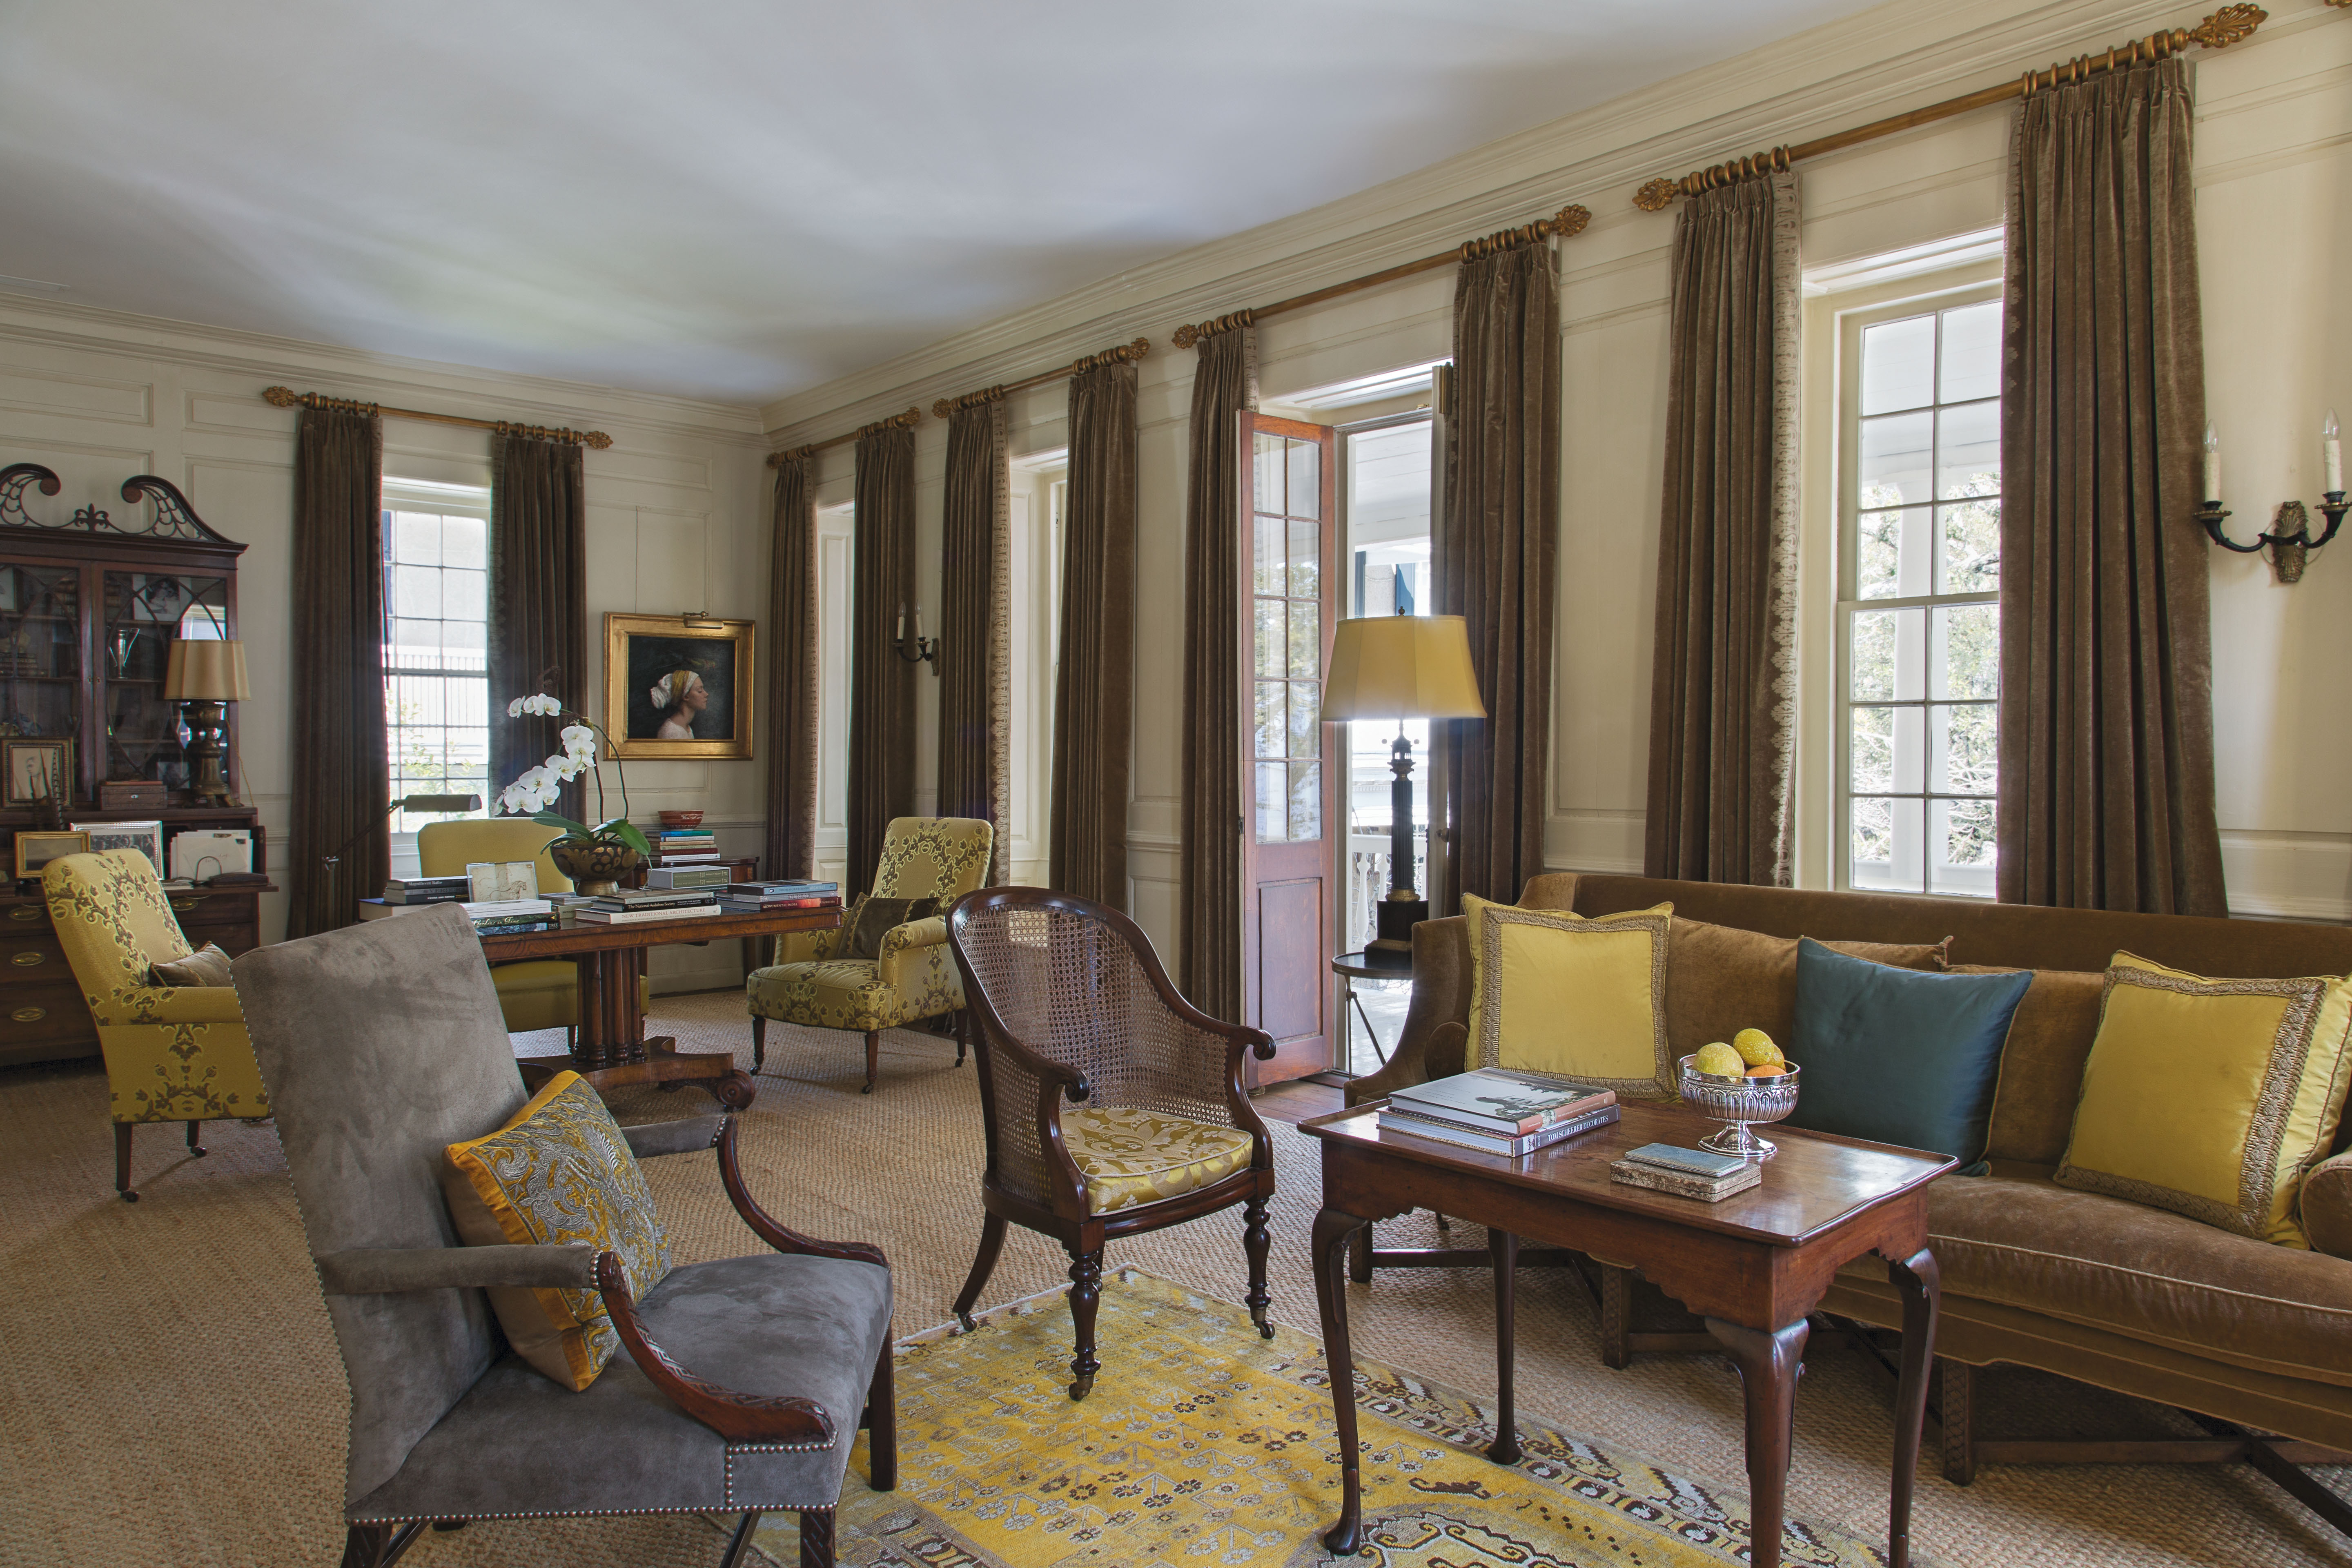 The upstairs drawing room is outfitted in a sophisticated palette of rich browns and yellows. An inviting mix of textures, from an antique Khotan rug atop seagrass to suede upholstery on the 18th-century armchair, adds visual interest, as do works by Ben Long and Louise Fenne.